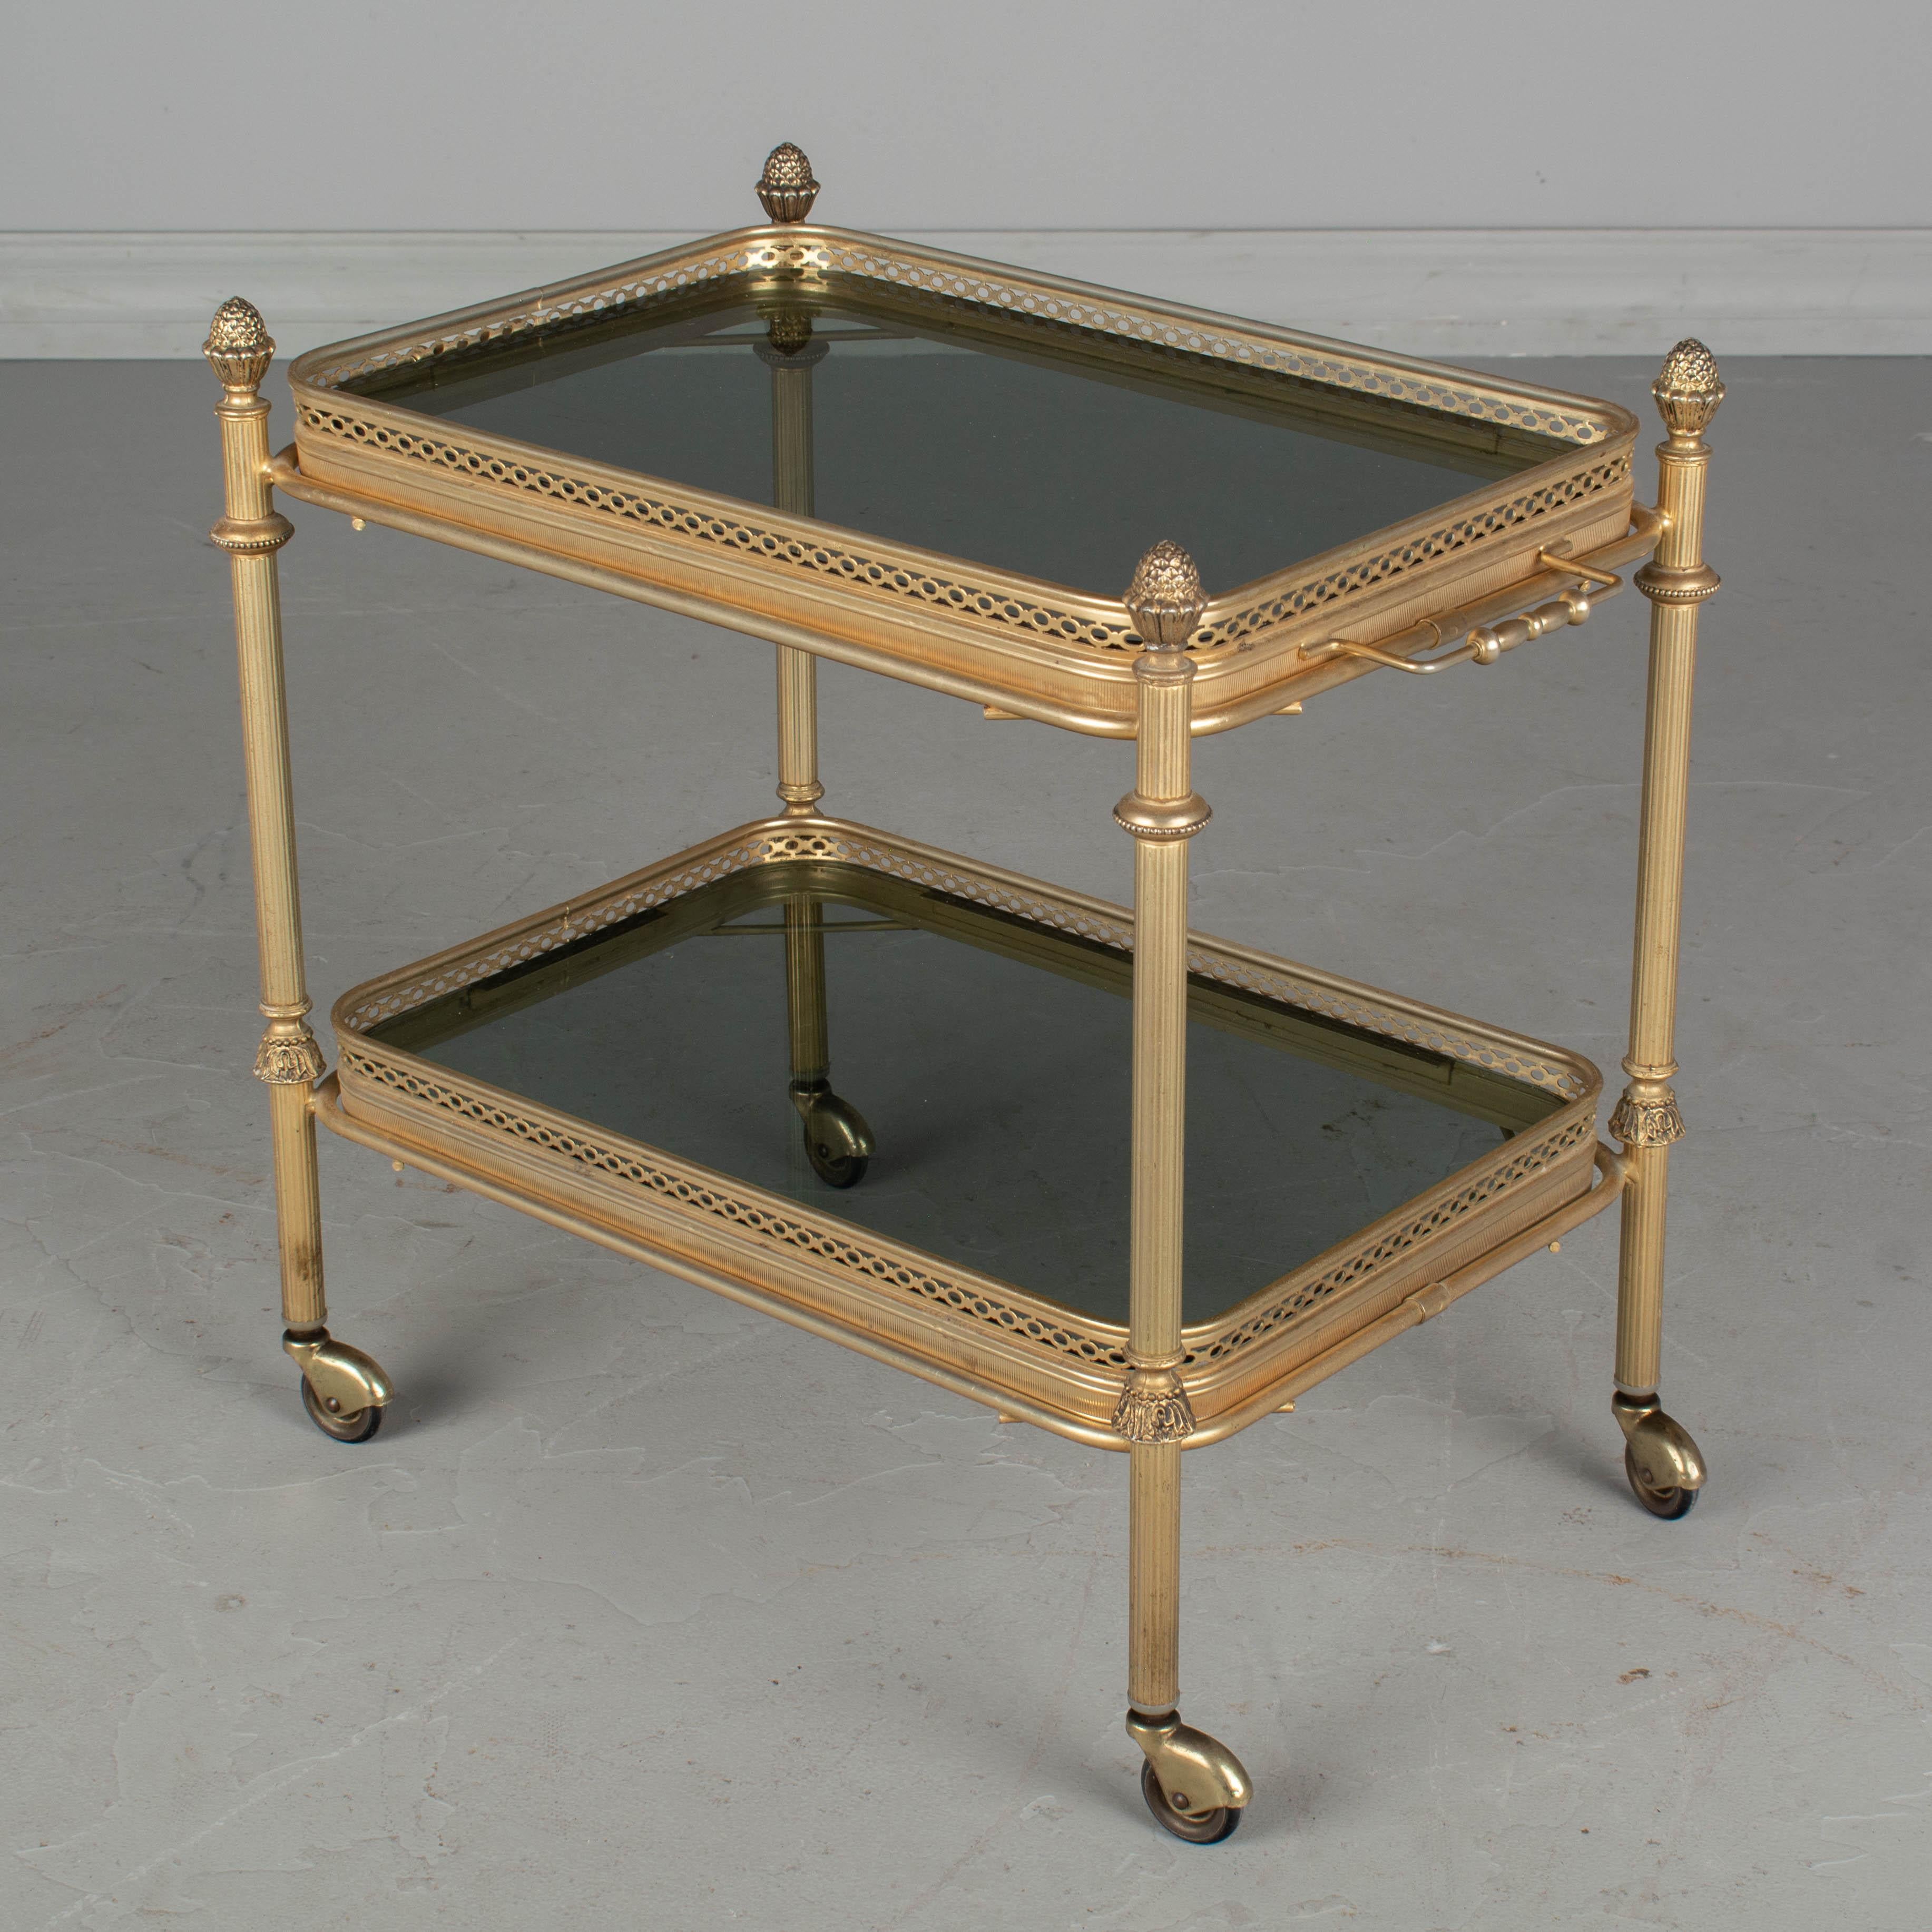 A diminutive Mid-Century Modern French bar cart, or drinks trolley, with brass plated finish and smoke glass shelves with decorative gallery. Each tray easily removes and the top tray has handles for serving drinks. Original rubber wheels glide